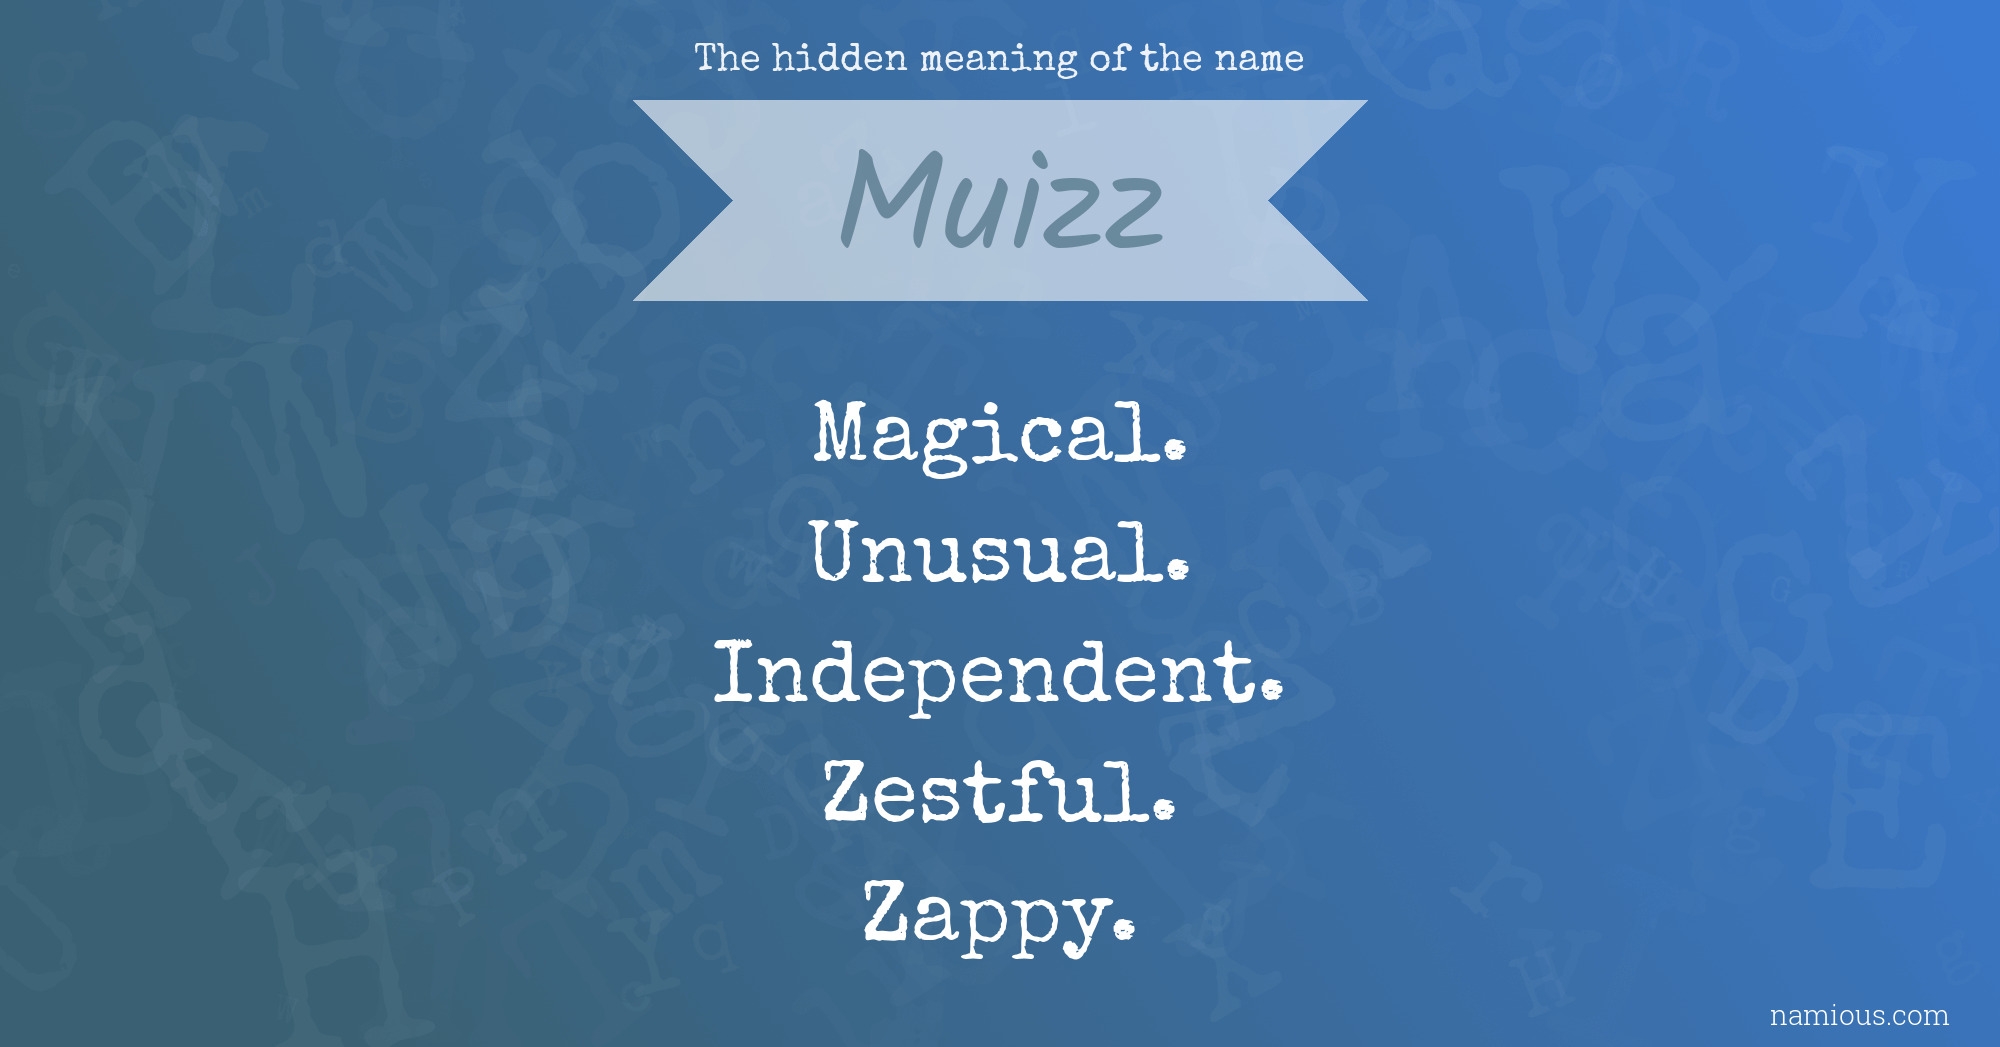 The hidden meaning of the name Muizz